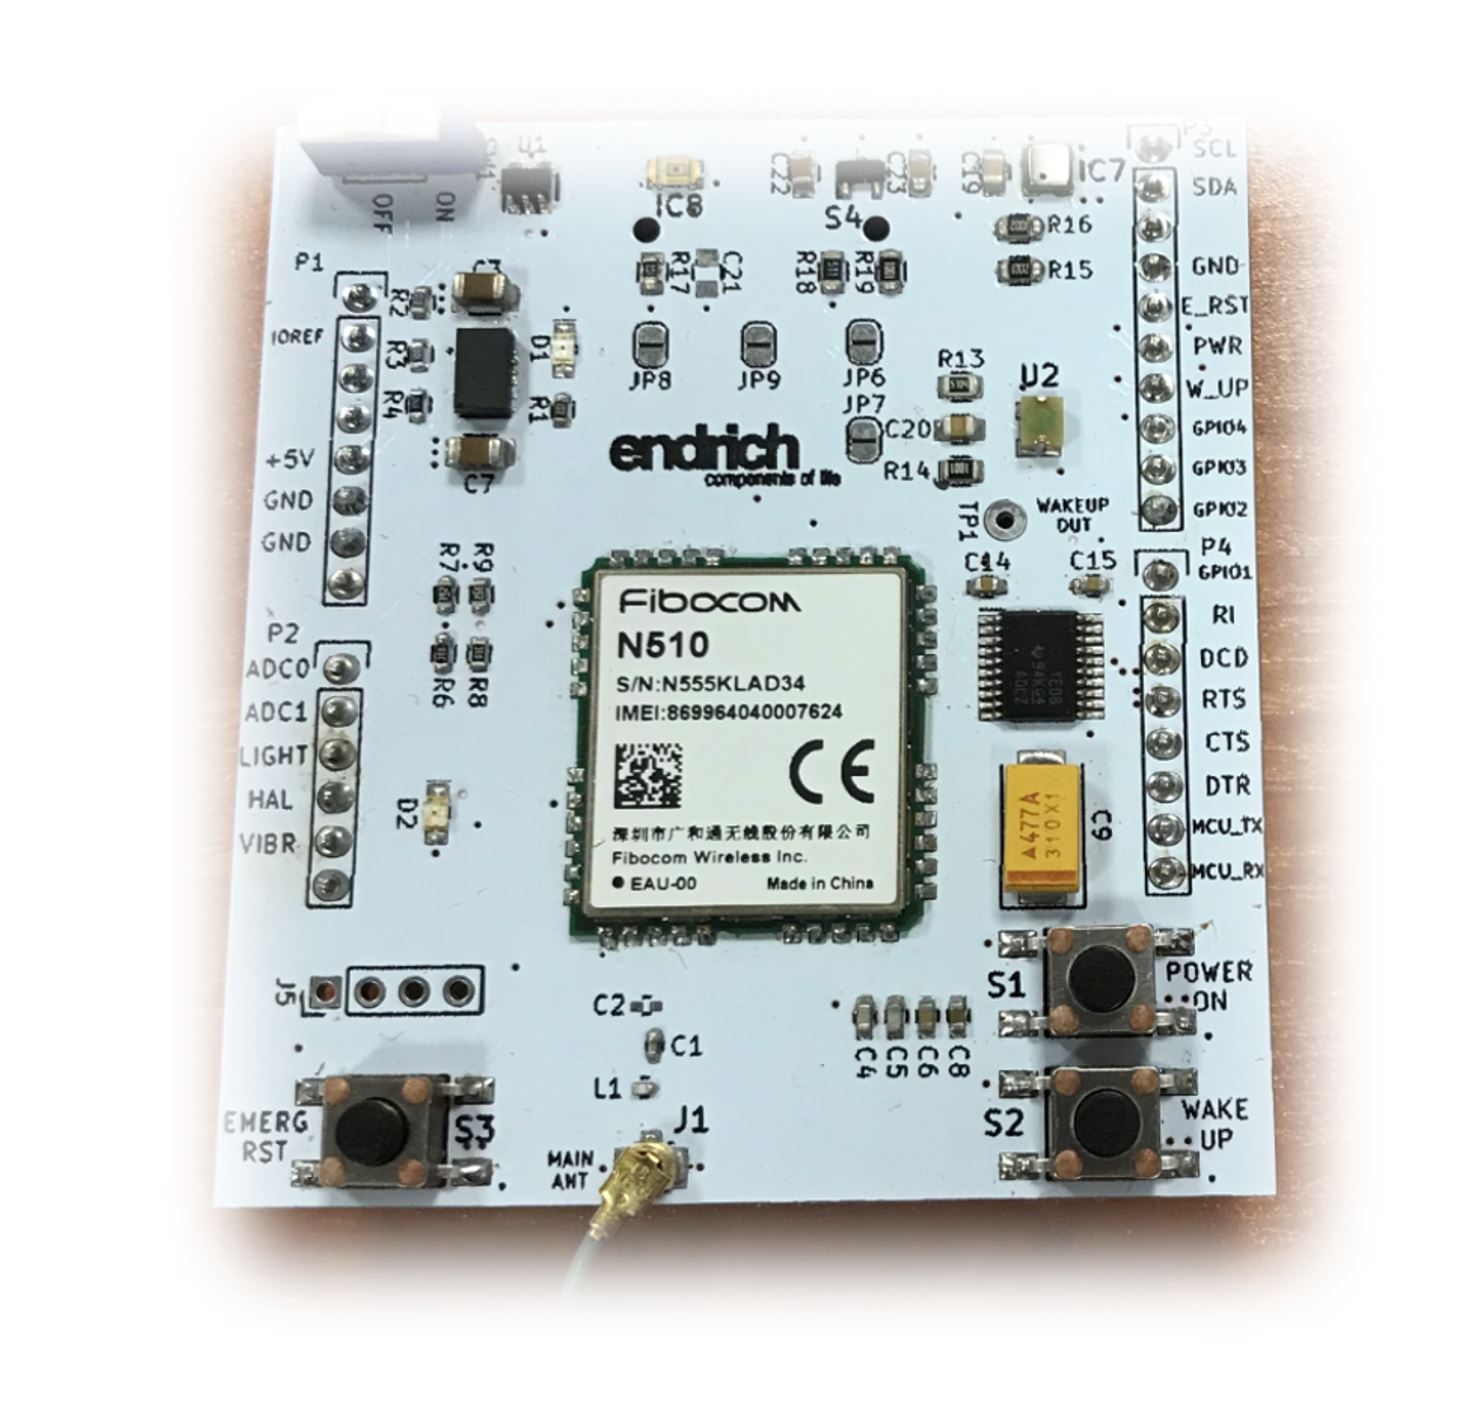 6: Second Step – Endrich IoT Sensor and Communication Shield